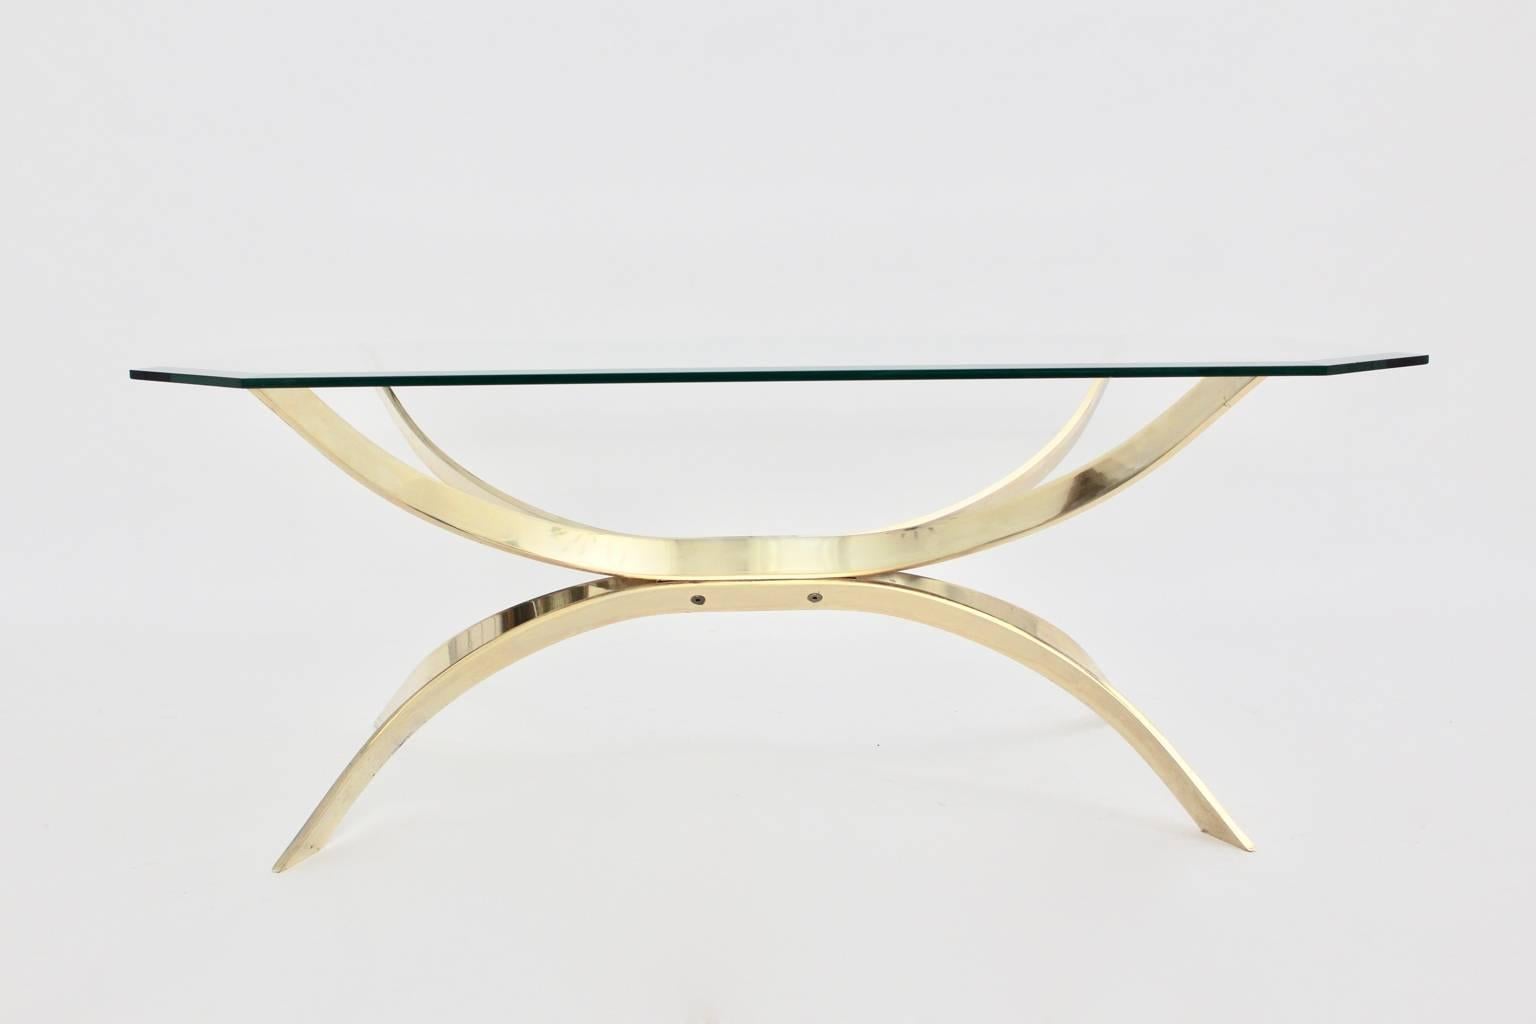 Great coffee table from the 1970s with a brass-plated base and an octagonal glass top, which is decorated with a facet. 
This coffee table appears very light and elegant.

The condition is very good with very minor signs of age and